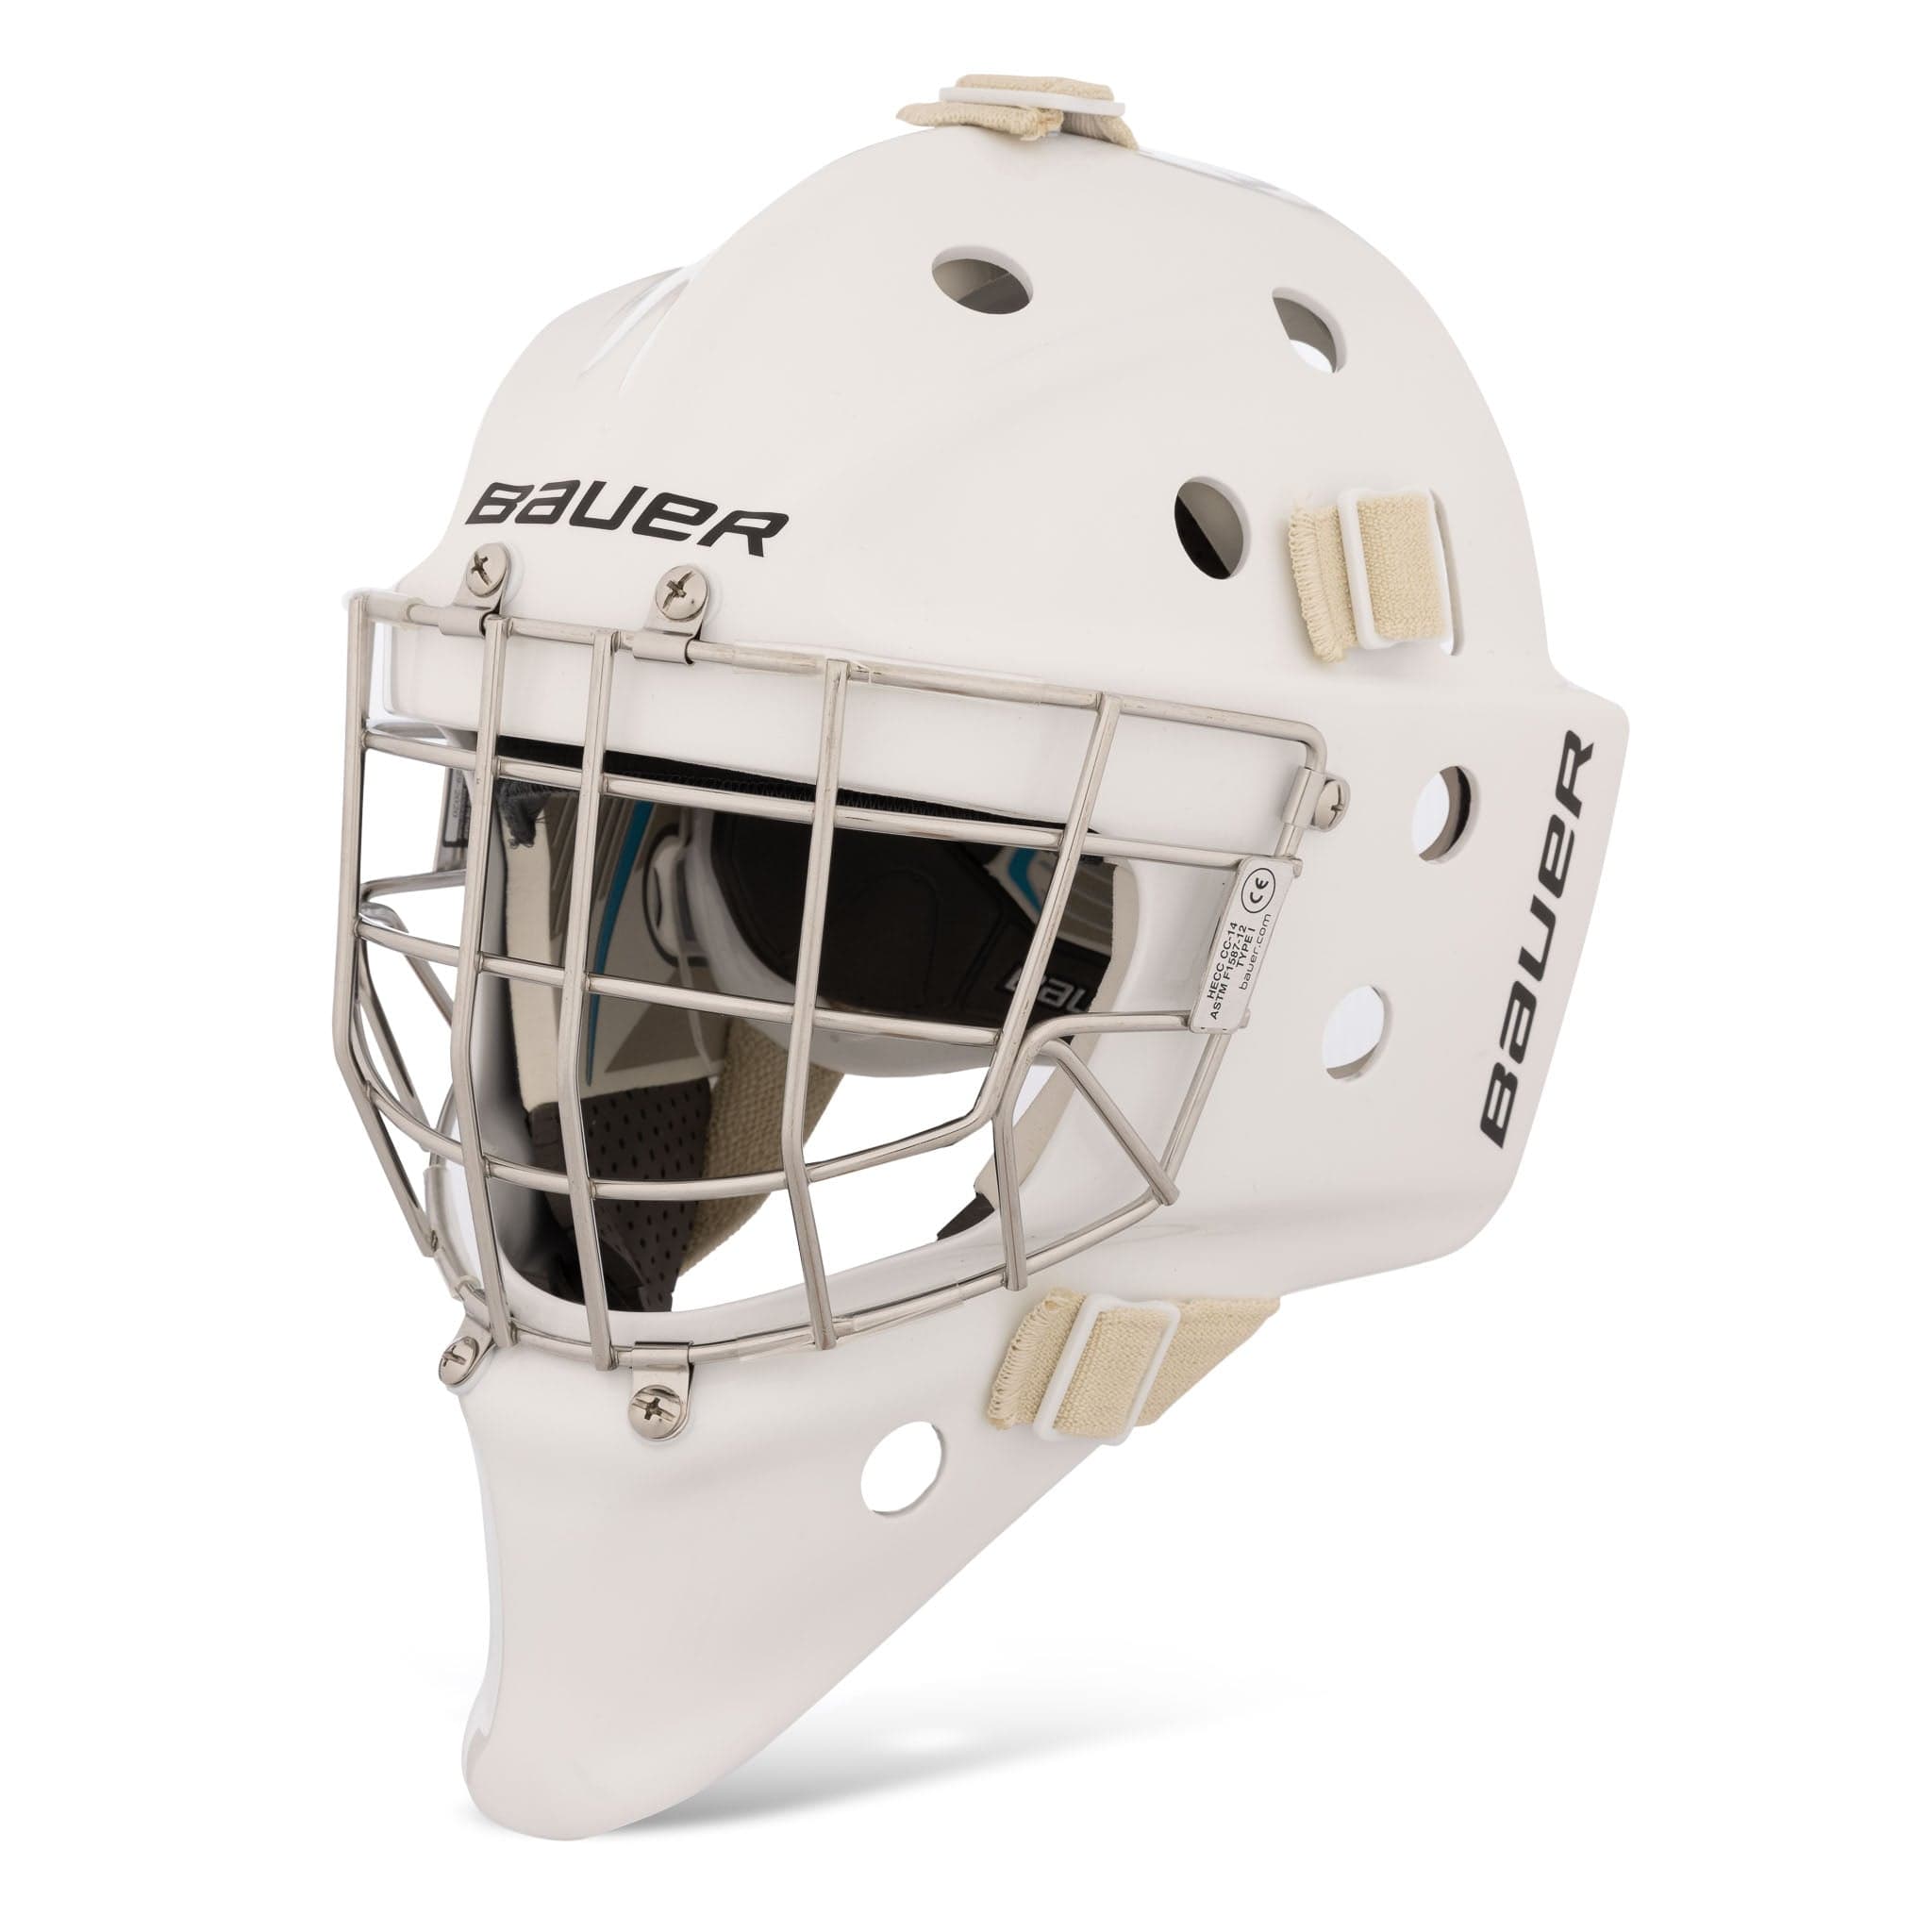 What's On My Goalie Mask - Pt. 1 